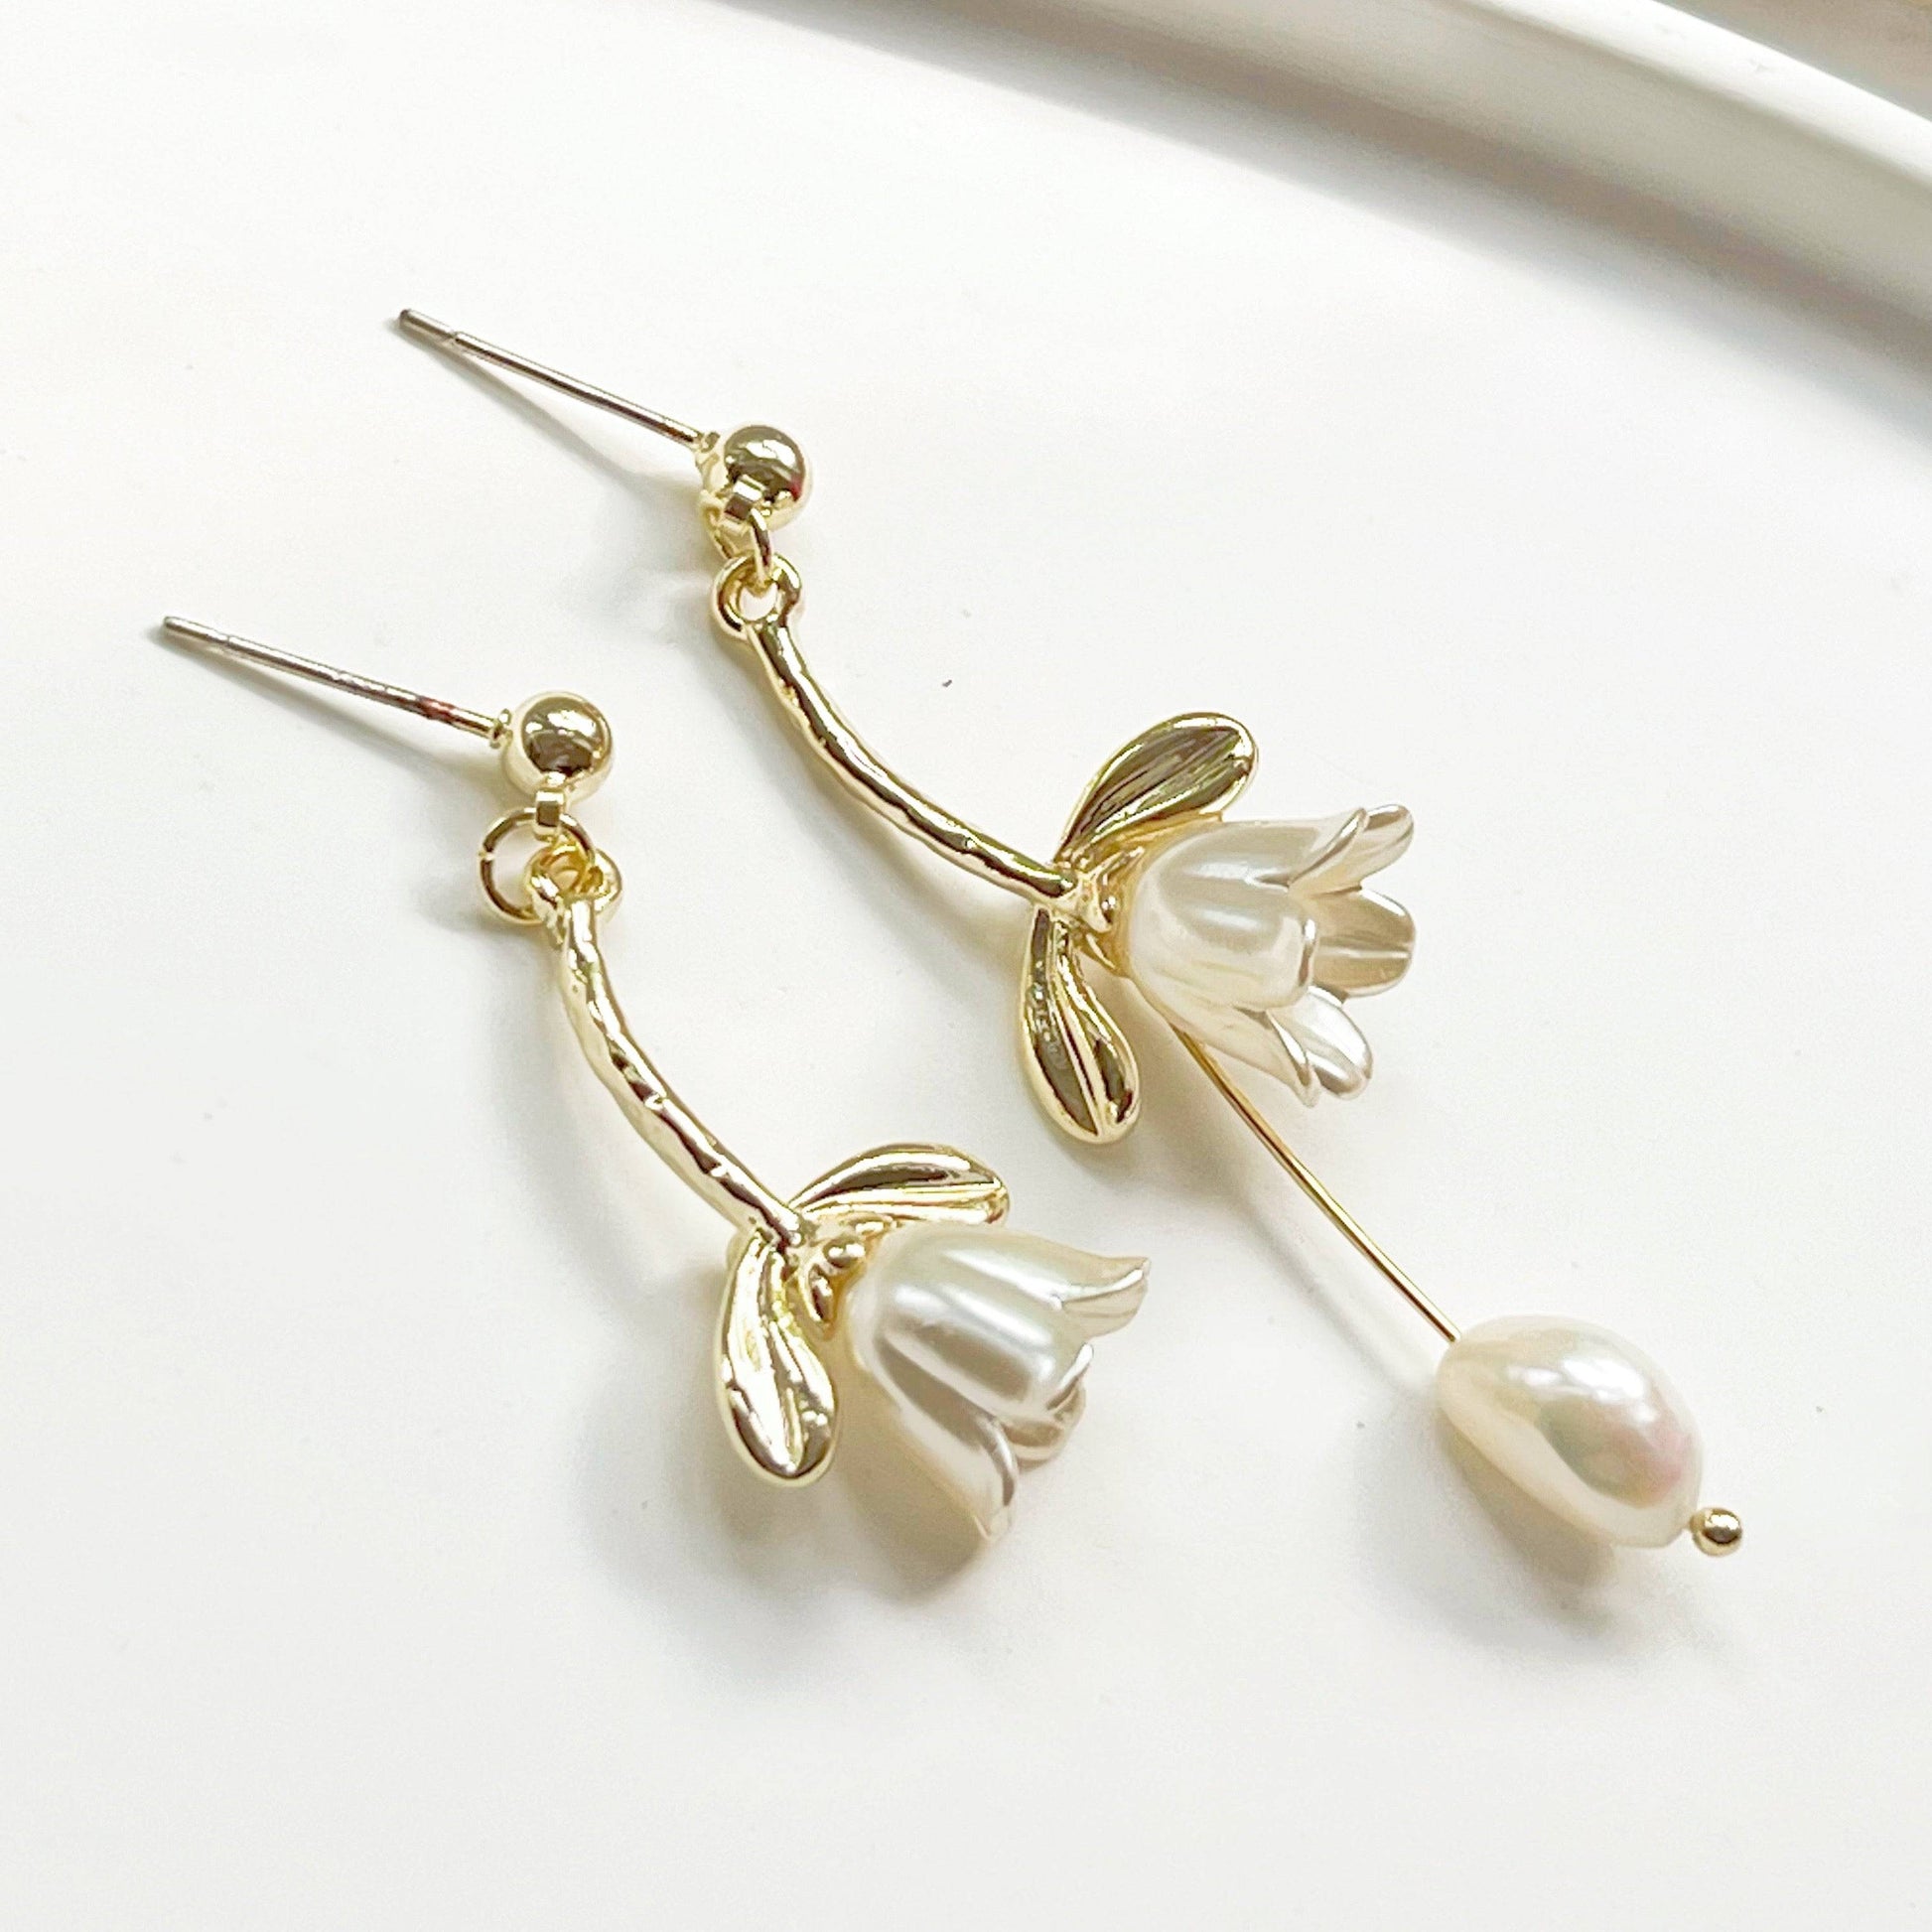 White Lily of the Valley Earrings - Bell Shape Flower with Pearl Drop Earrings-Ninaouity